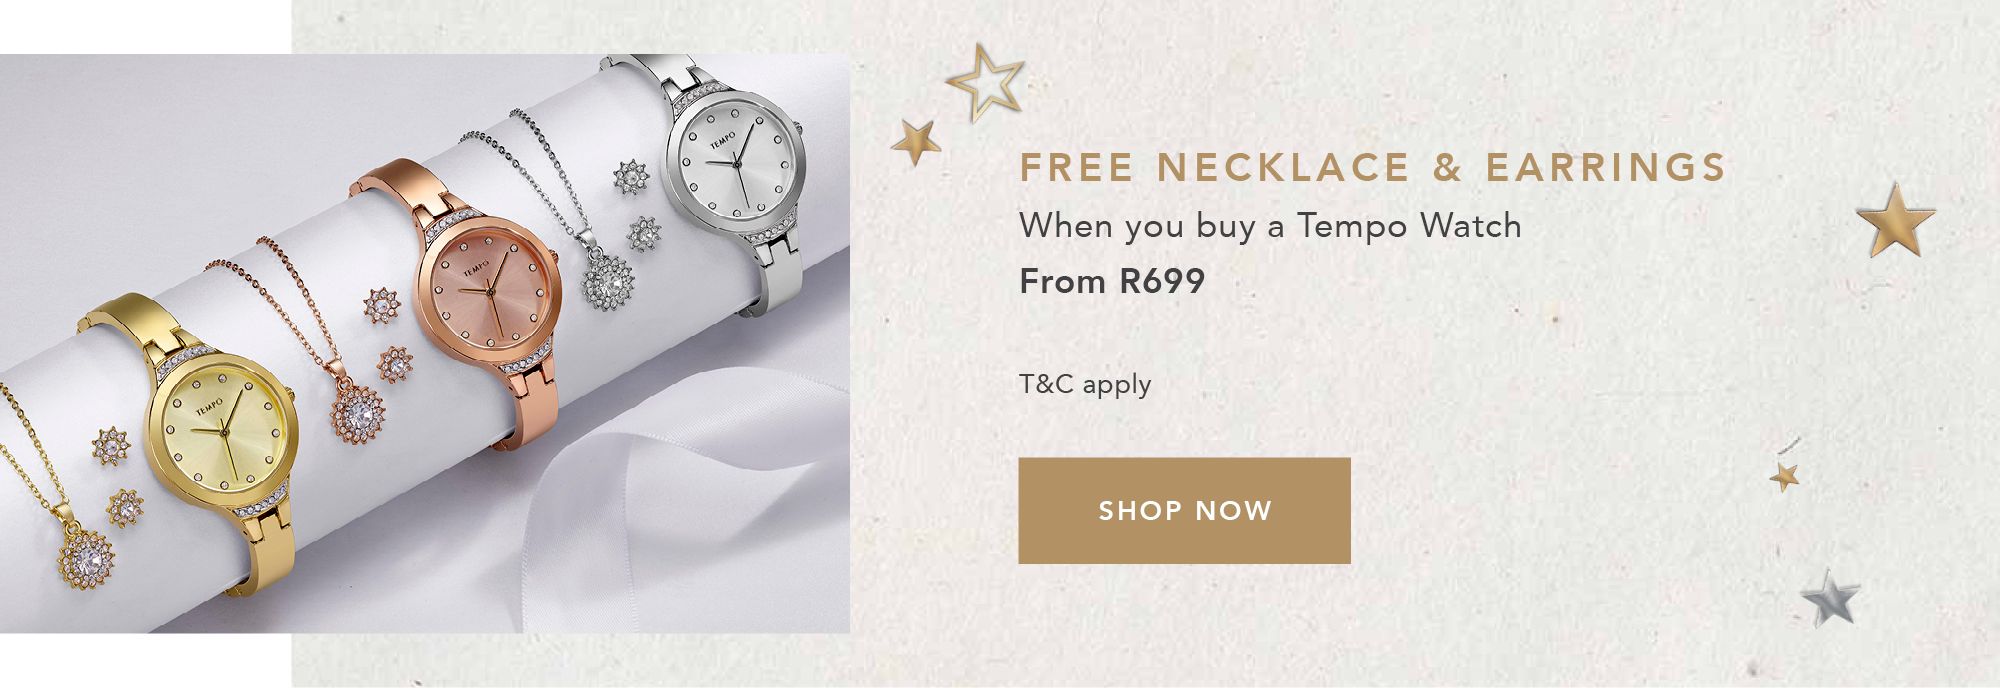 FREE NECKLACE & EARRINGS When you buy a Tempo Watch From R699